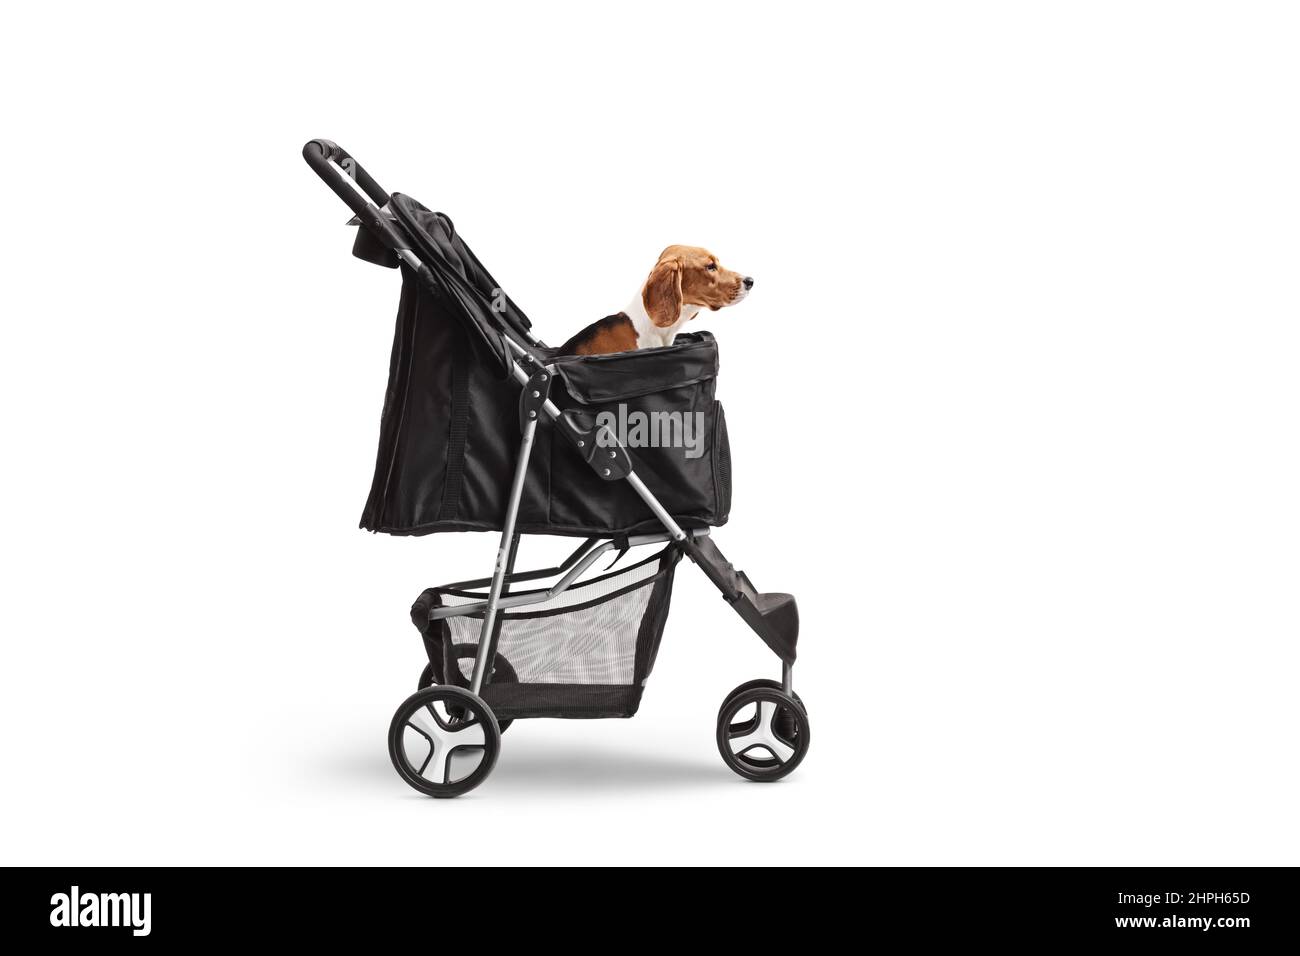 Beagle seated in a dog stroller isolated on white background Stock Photo